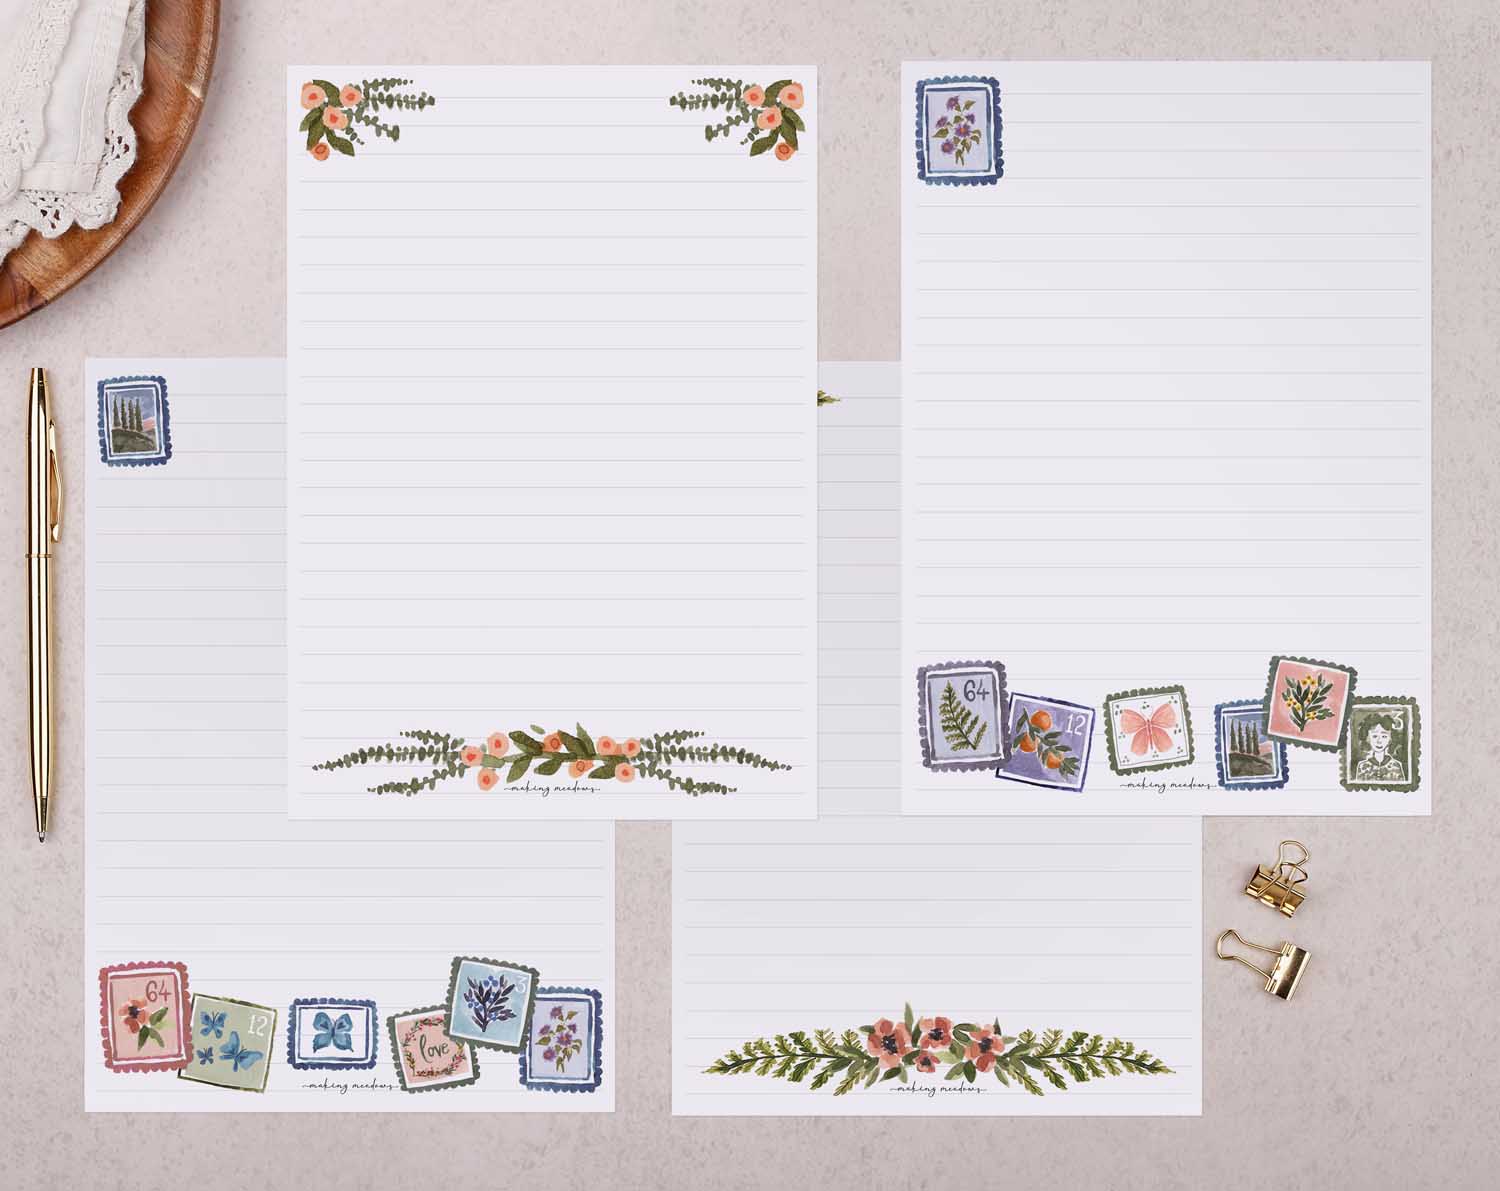 32 sheets of floral stamp design writing paper in a gift box set.